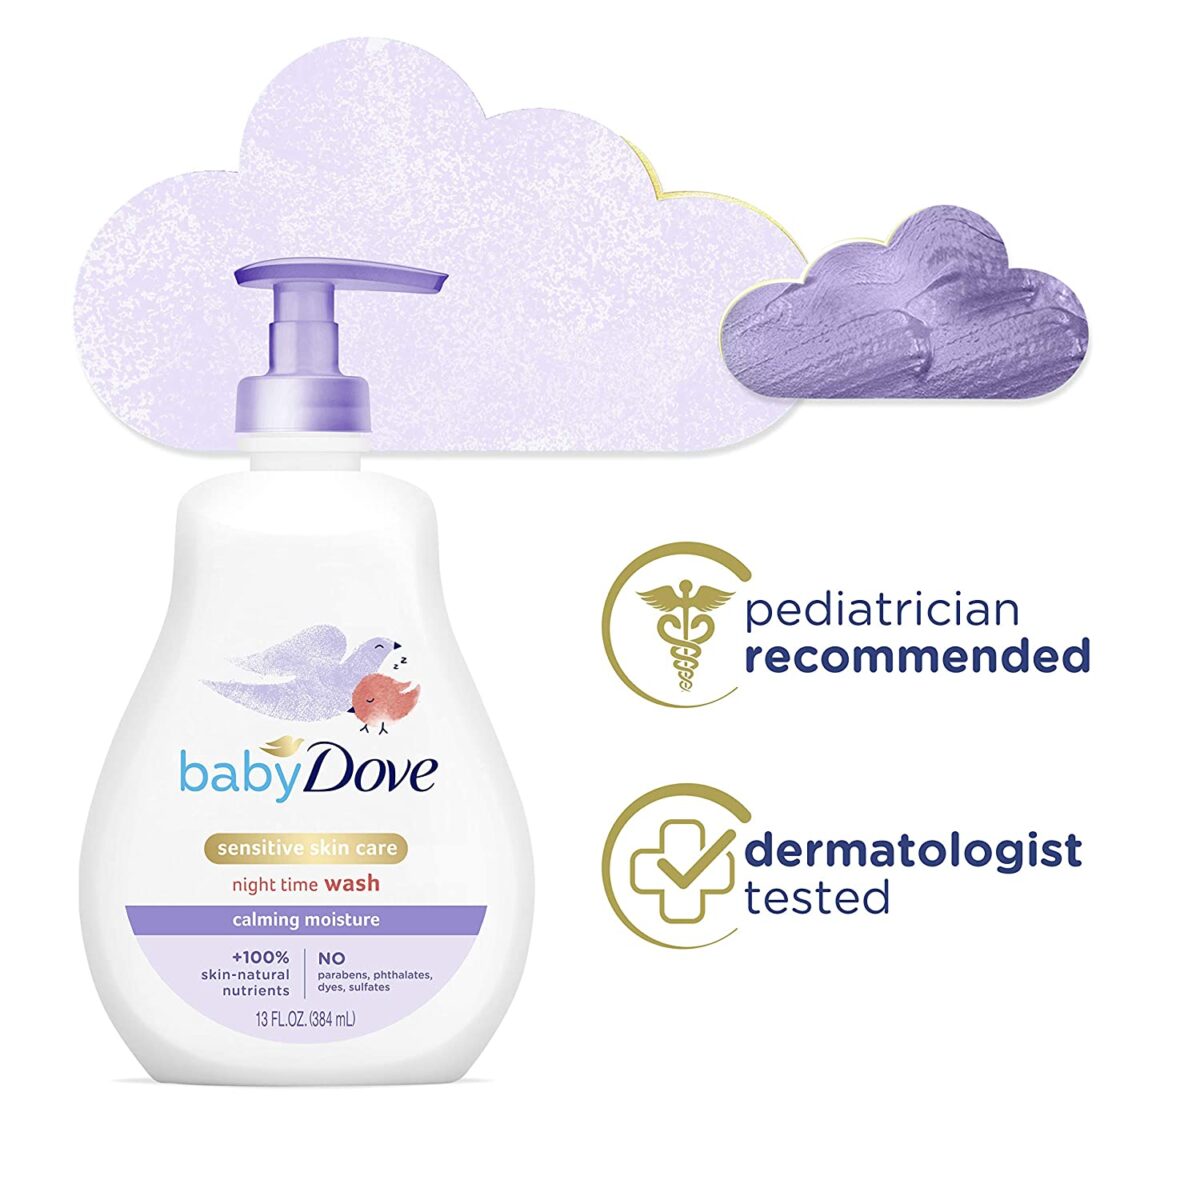 Baby Dove Sensitive Skin Care Baby Wash For a Calming Baby Bath Wash Calming Moisture Hypoallergenic and Tear-Free, Washes Away Bacteria 13 oz